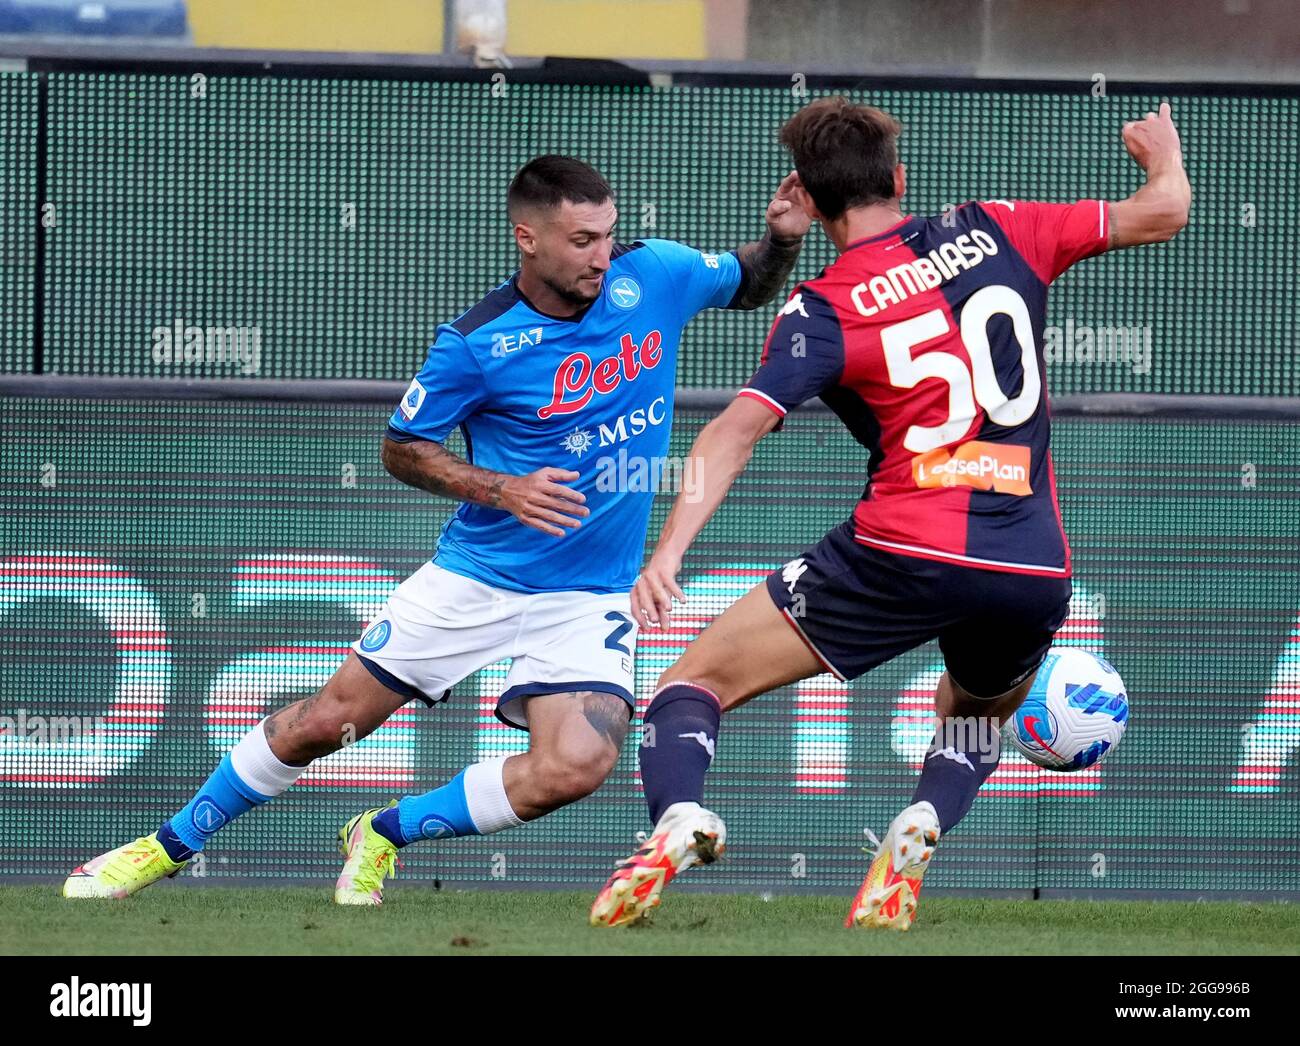 GENOA, ITALY - AUGUST 29: Adam Ounas of SSC Napoli competes for